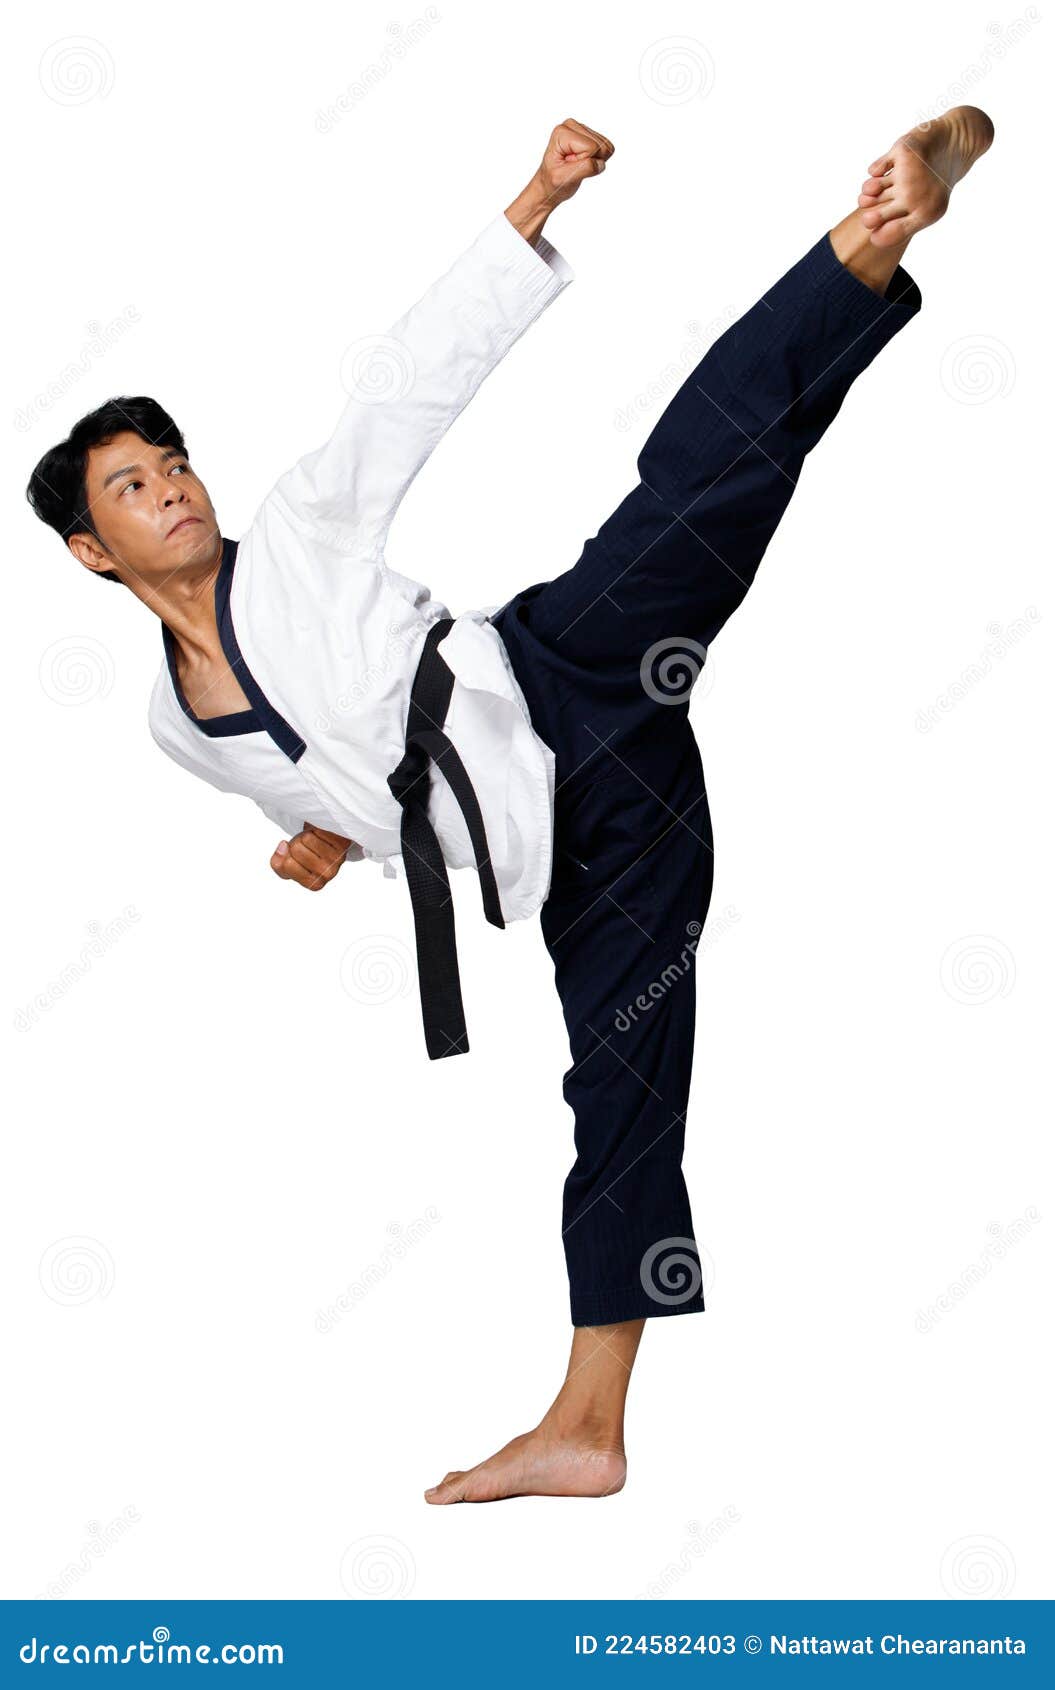 Premium Vector | A man is kicking a karate pose with a black background.